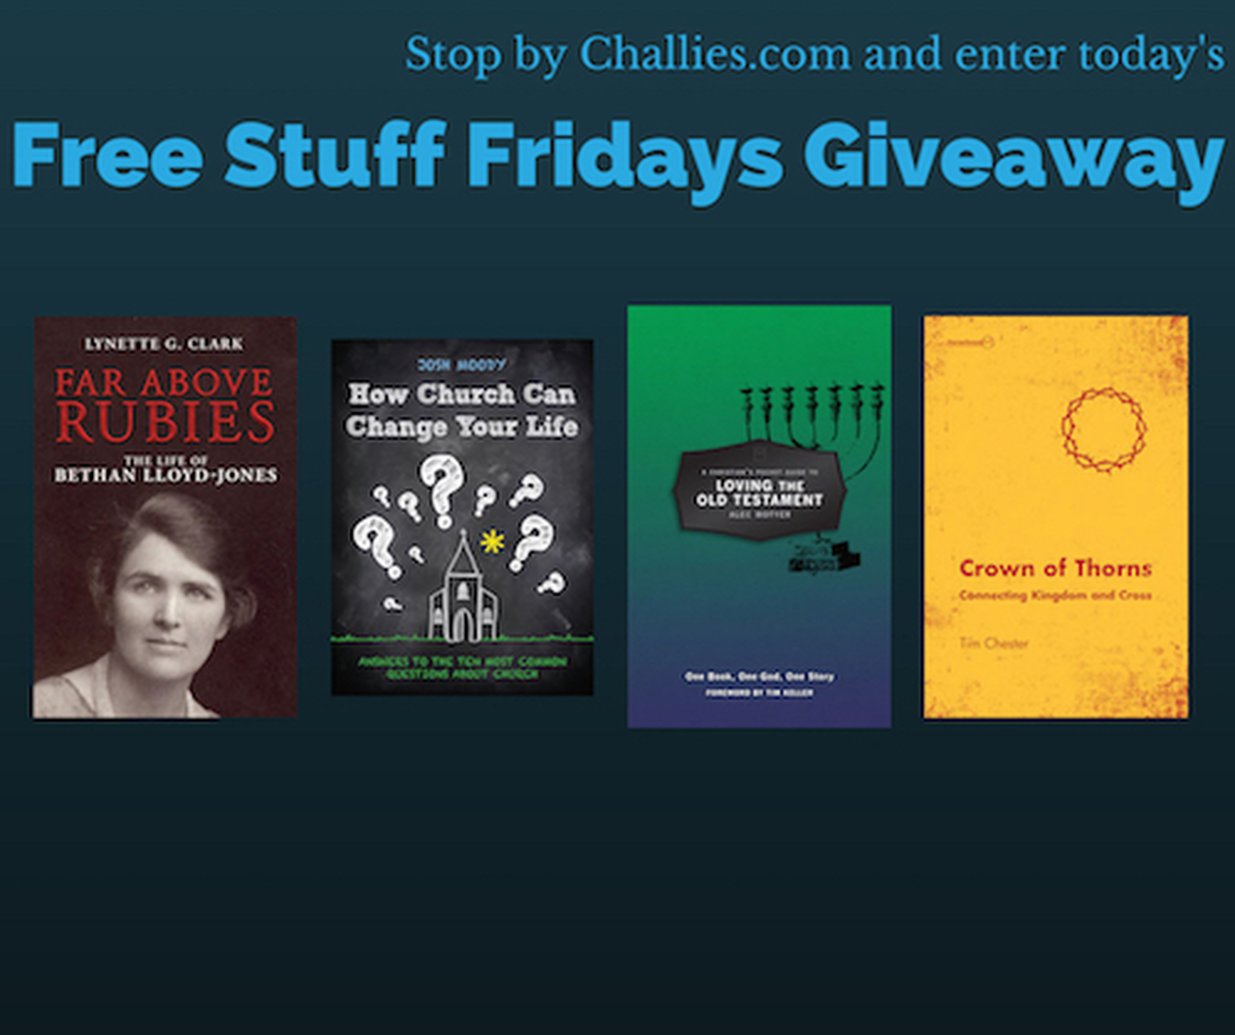 Enter The Free Stuff Fridays Giveaway Today at Challies.com